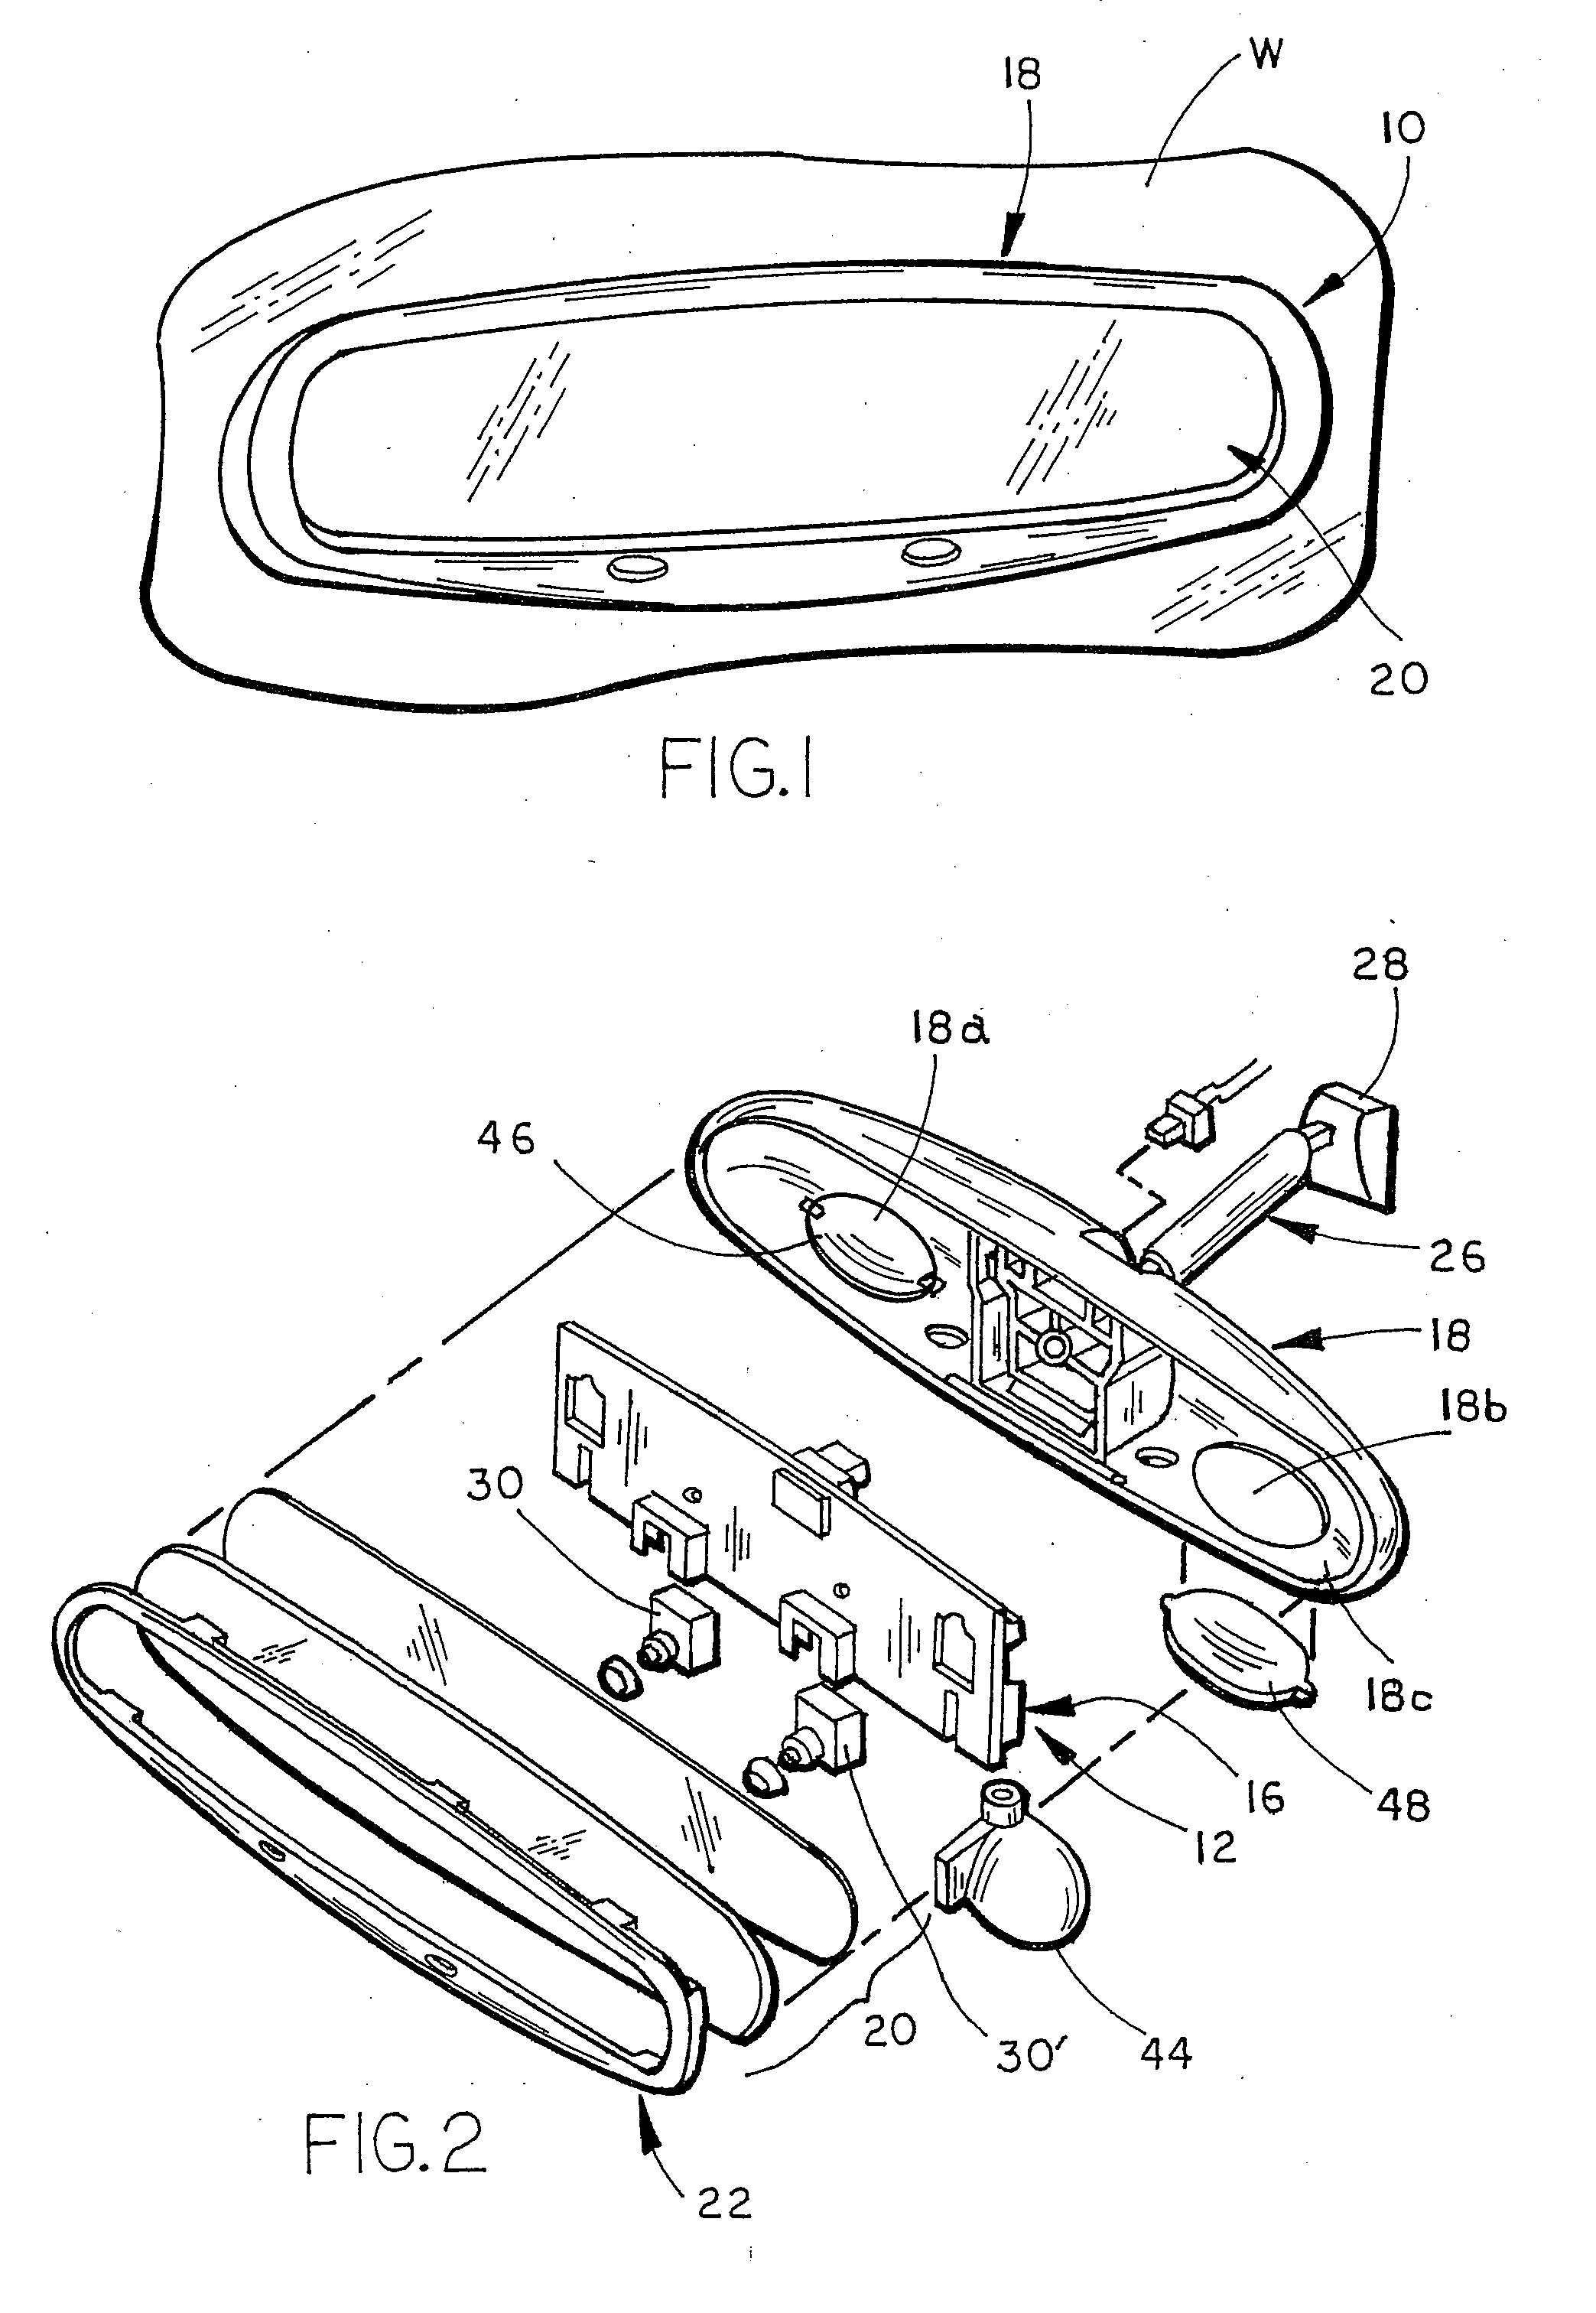 Lighting system for a vehicle